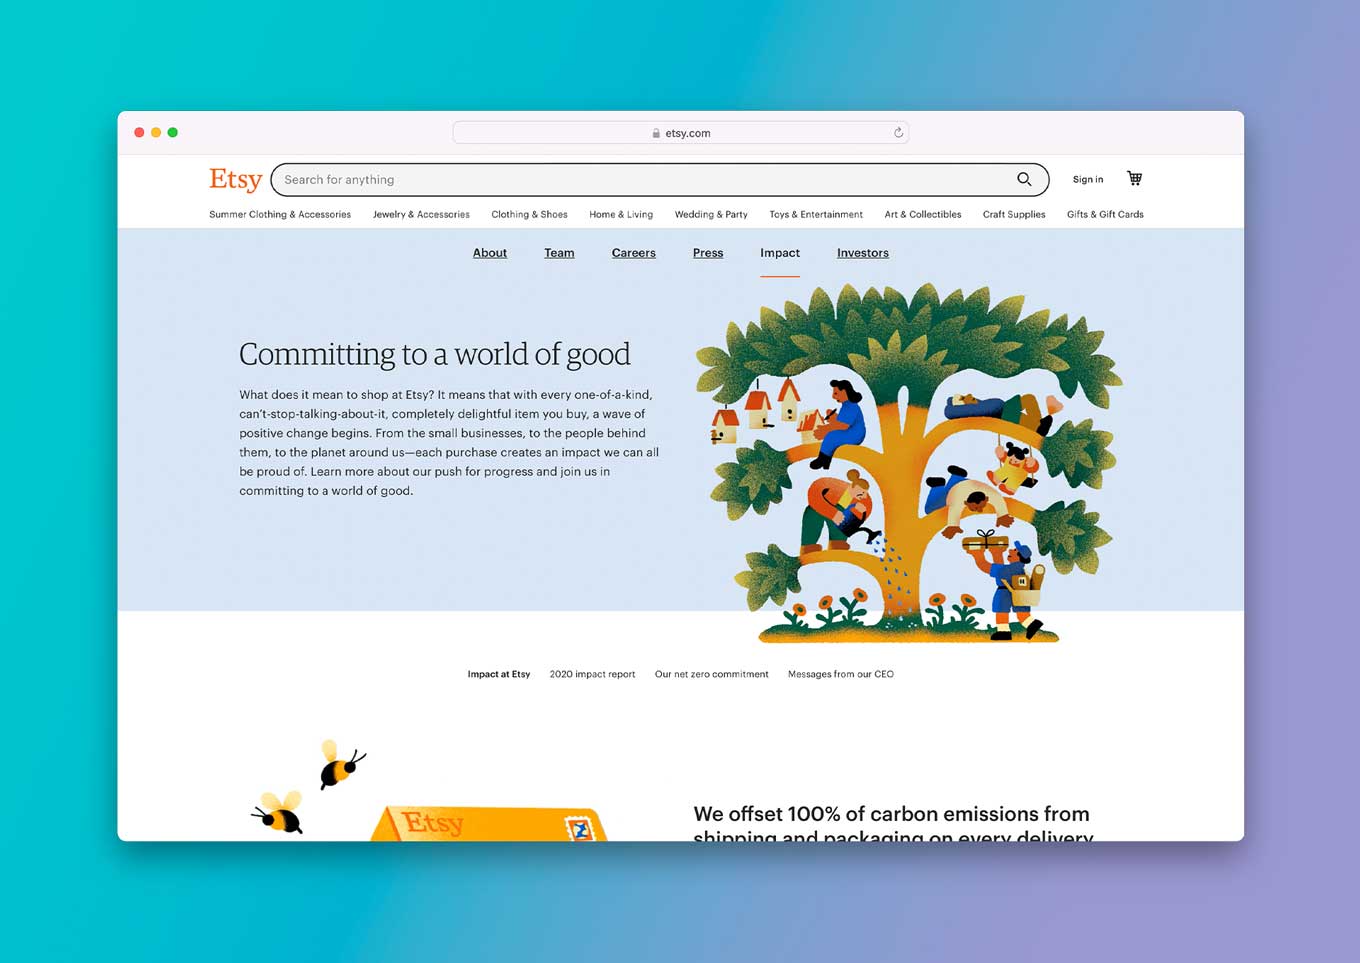 Etsy Website: "Committing to a world of good"